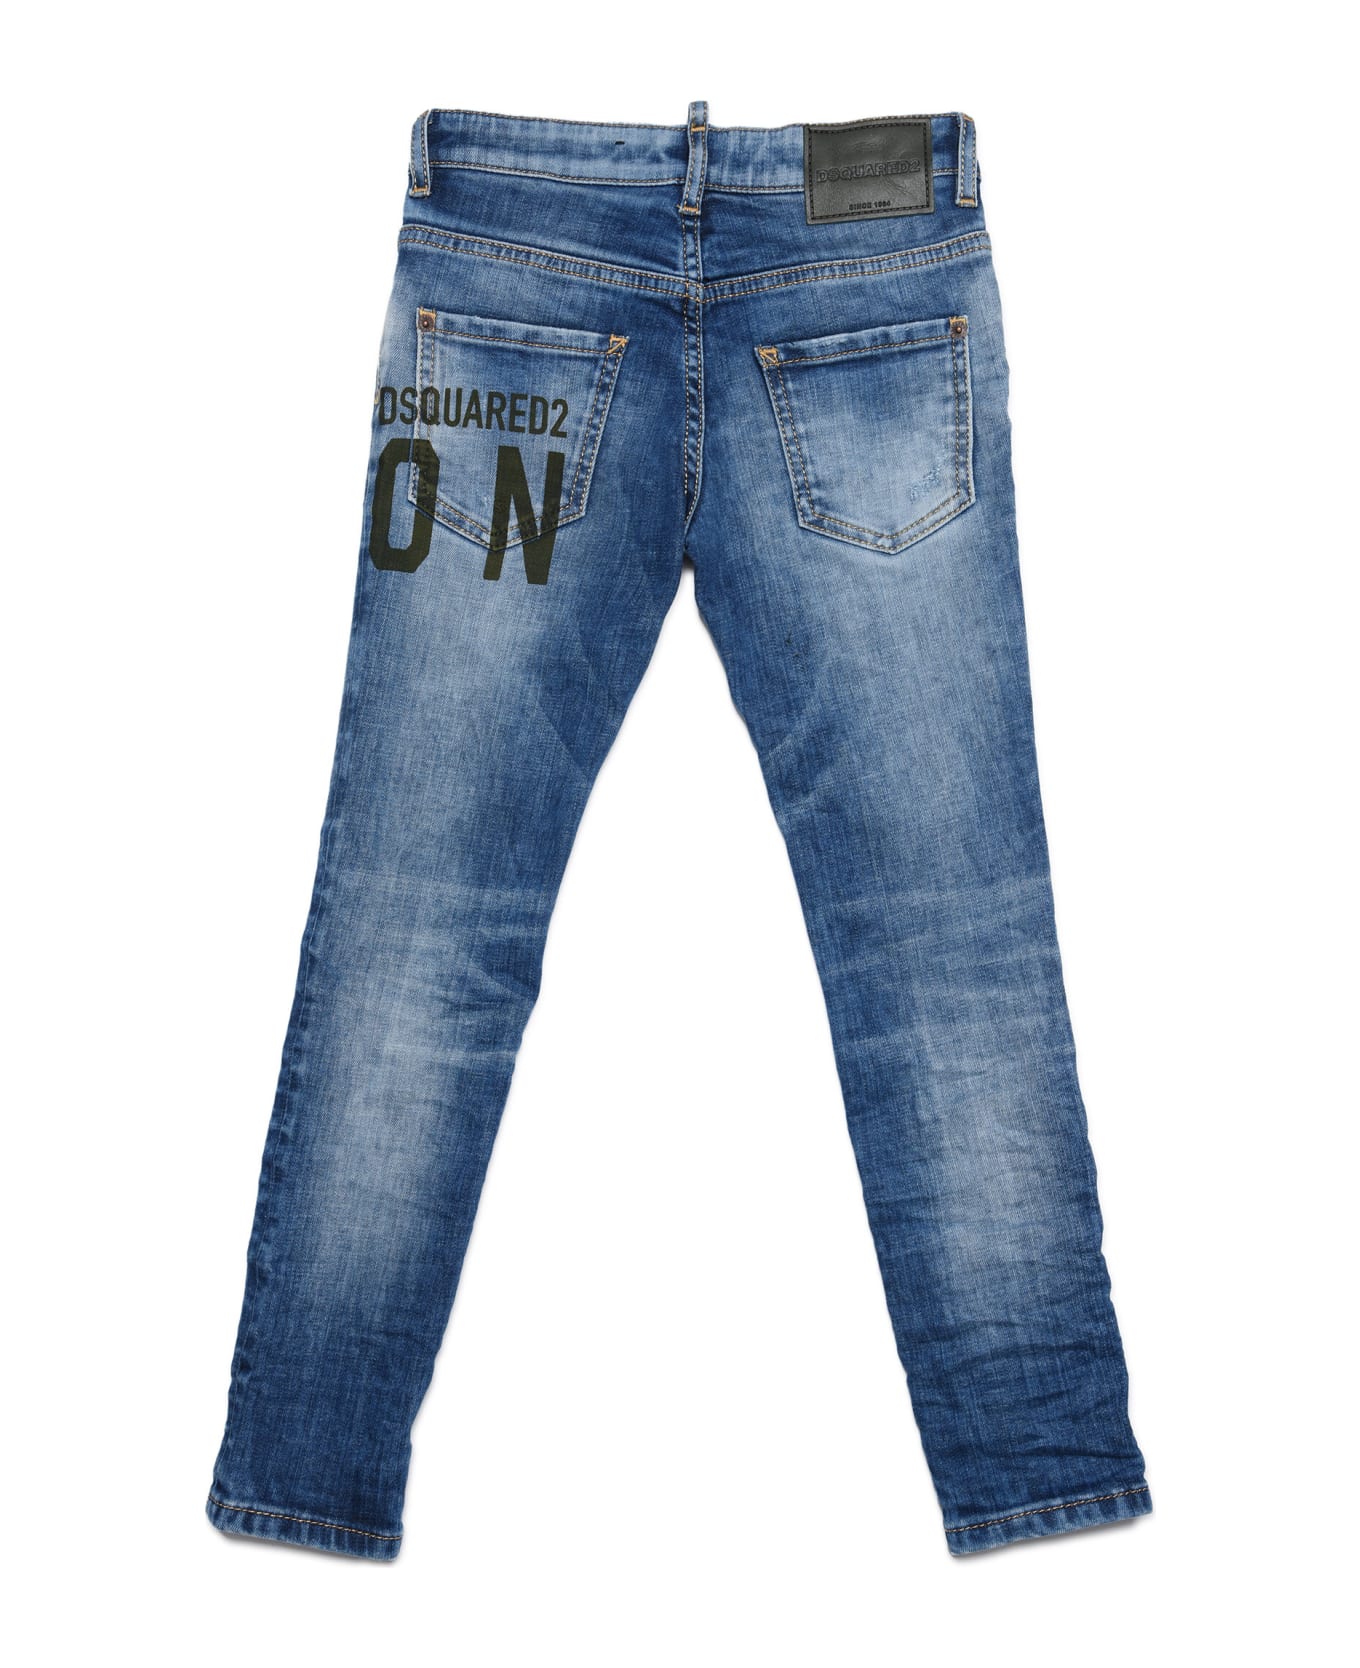 Dsquared2 D2p118lm Skater Jean Trousers Dsquared - DENIM BLUE ボトムス